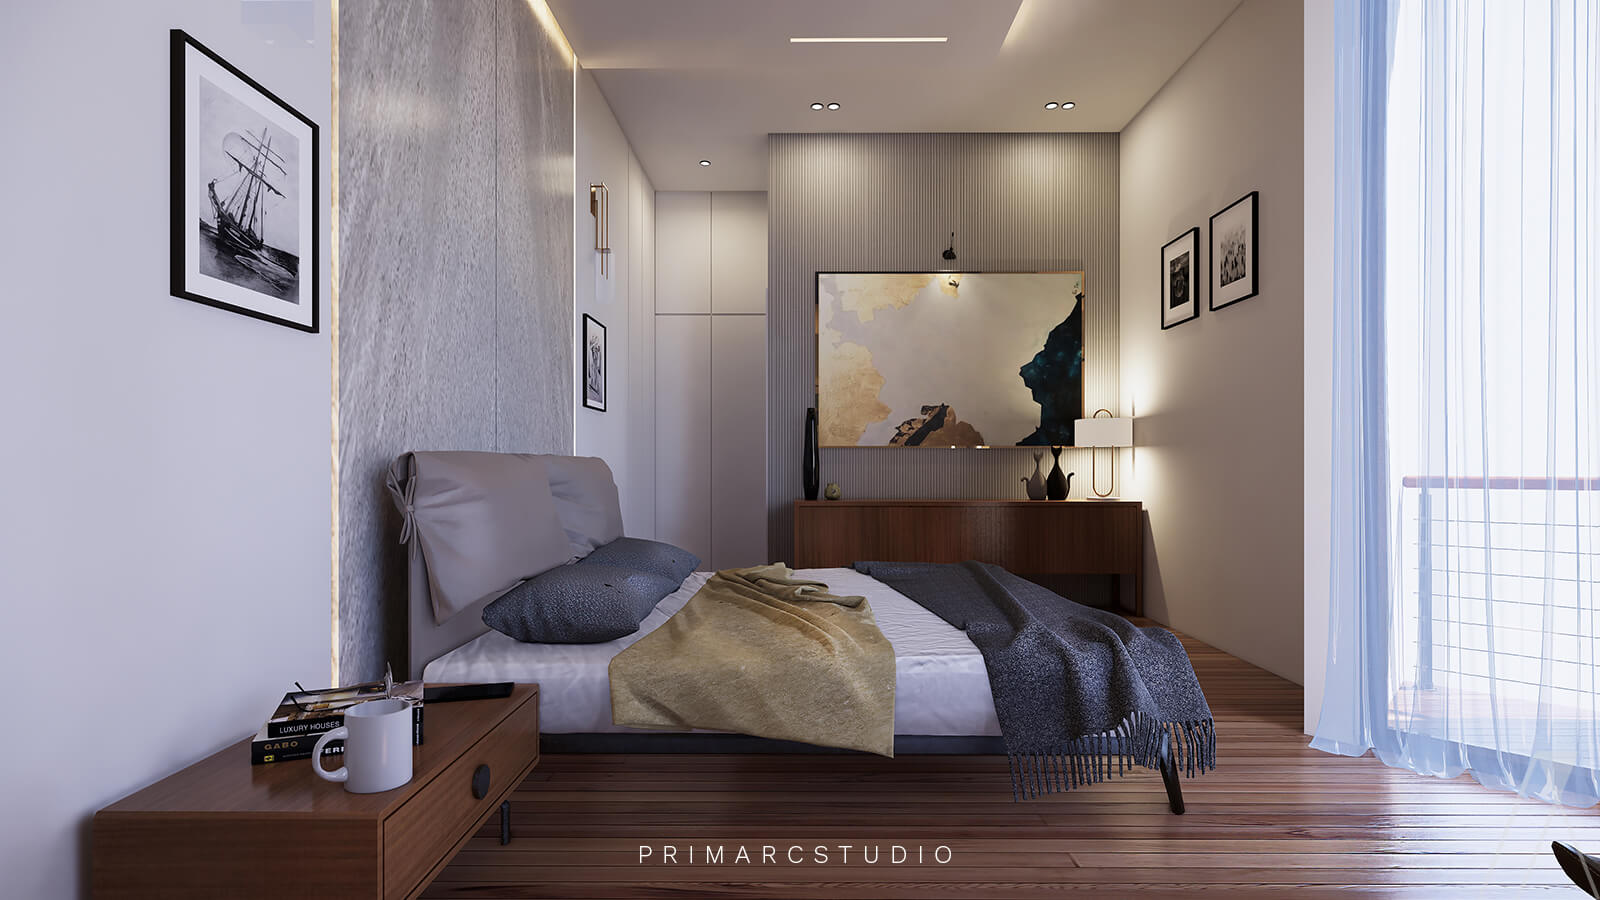 Bedroom interior design with balcony and paintings in the room